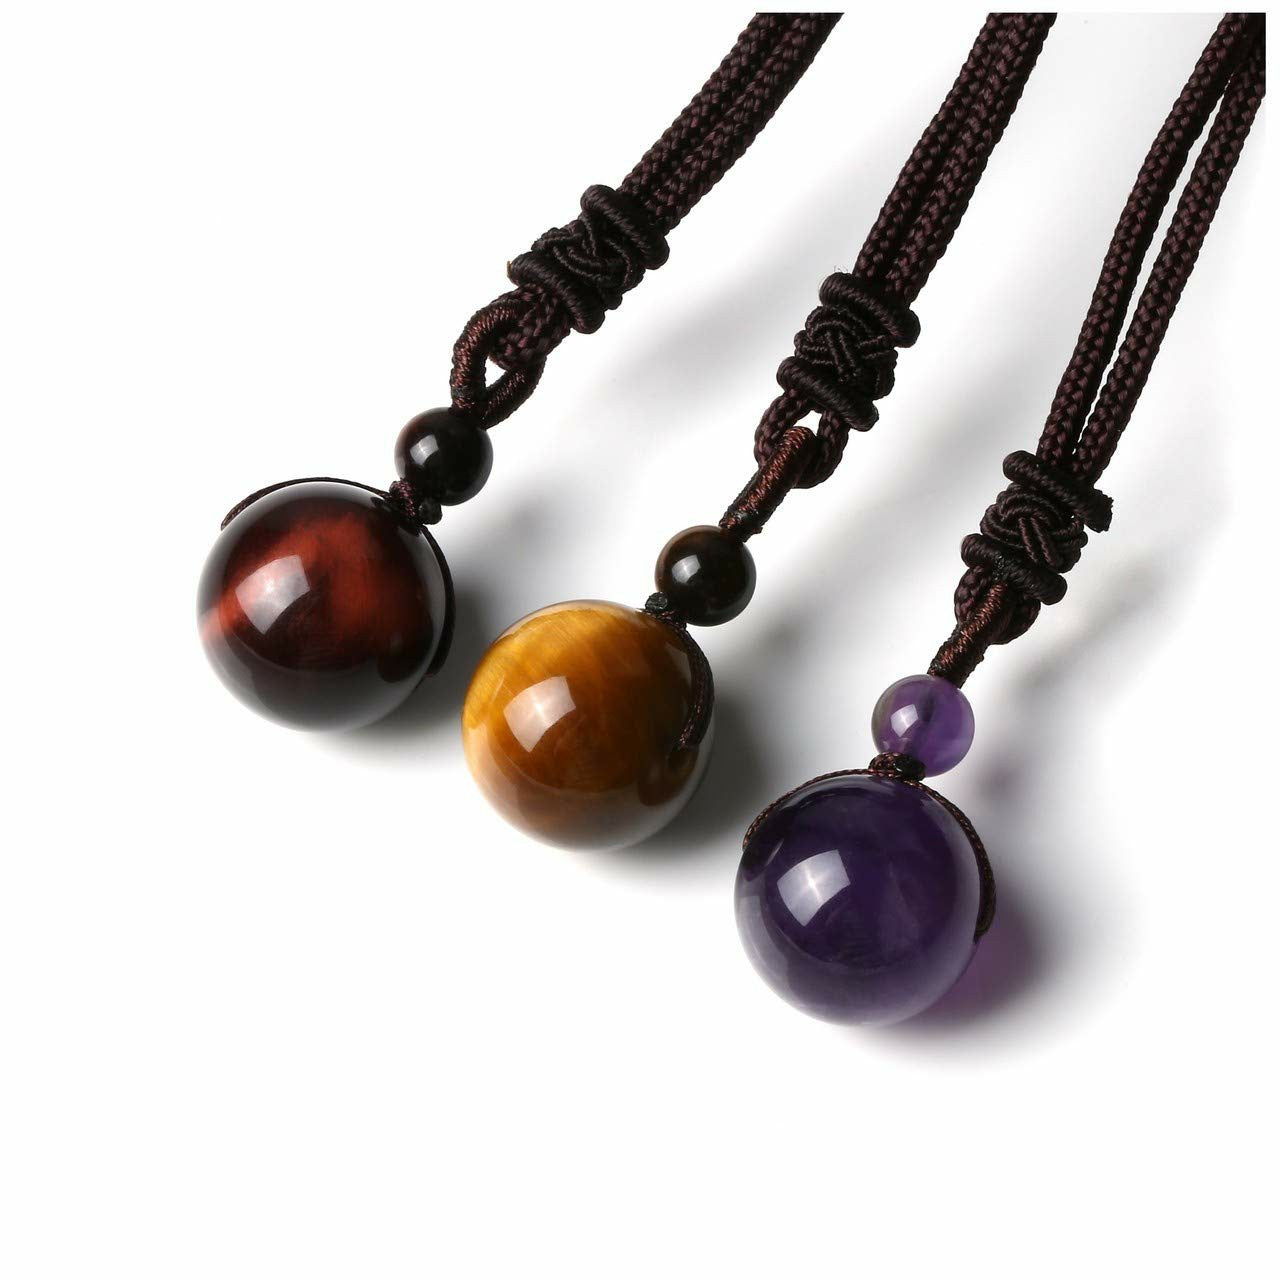 Fashion 16mm Natural Obsidian Pendant Amethyst Necklace For Men And Women - AccessoryOrbit